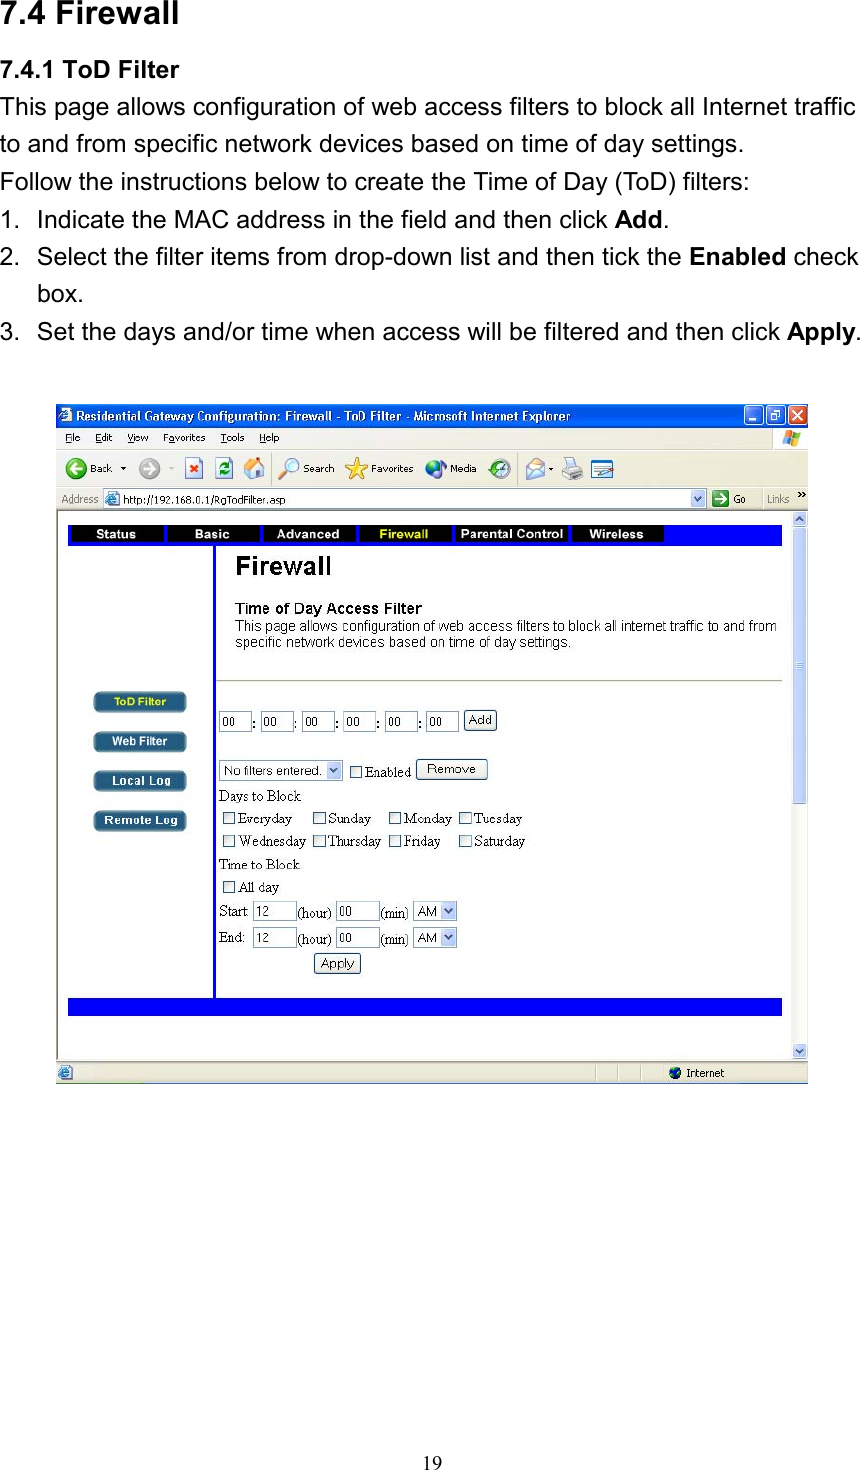 7.4 Firewall 7.4.1 ToD Filter This page allows configuration of web access filters to block all Internet traffic to and from specific network devices based on time of day settings. Follow the instructions below to create the Time of Day (ToD) filters: 1.  Indicate the MAC address in the field and then click Add. 2.  Select the filter items from drop-down list and then tick the Enabled check box. 3.  Set the days and/or time when access will be filtered and then click Apply.     19